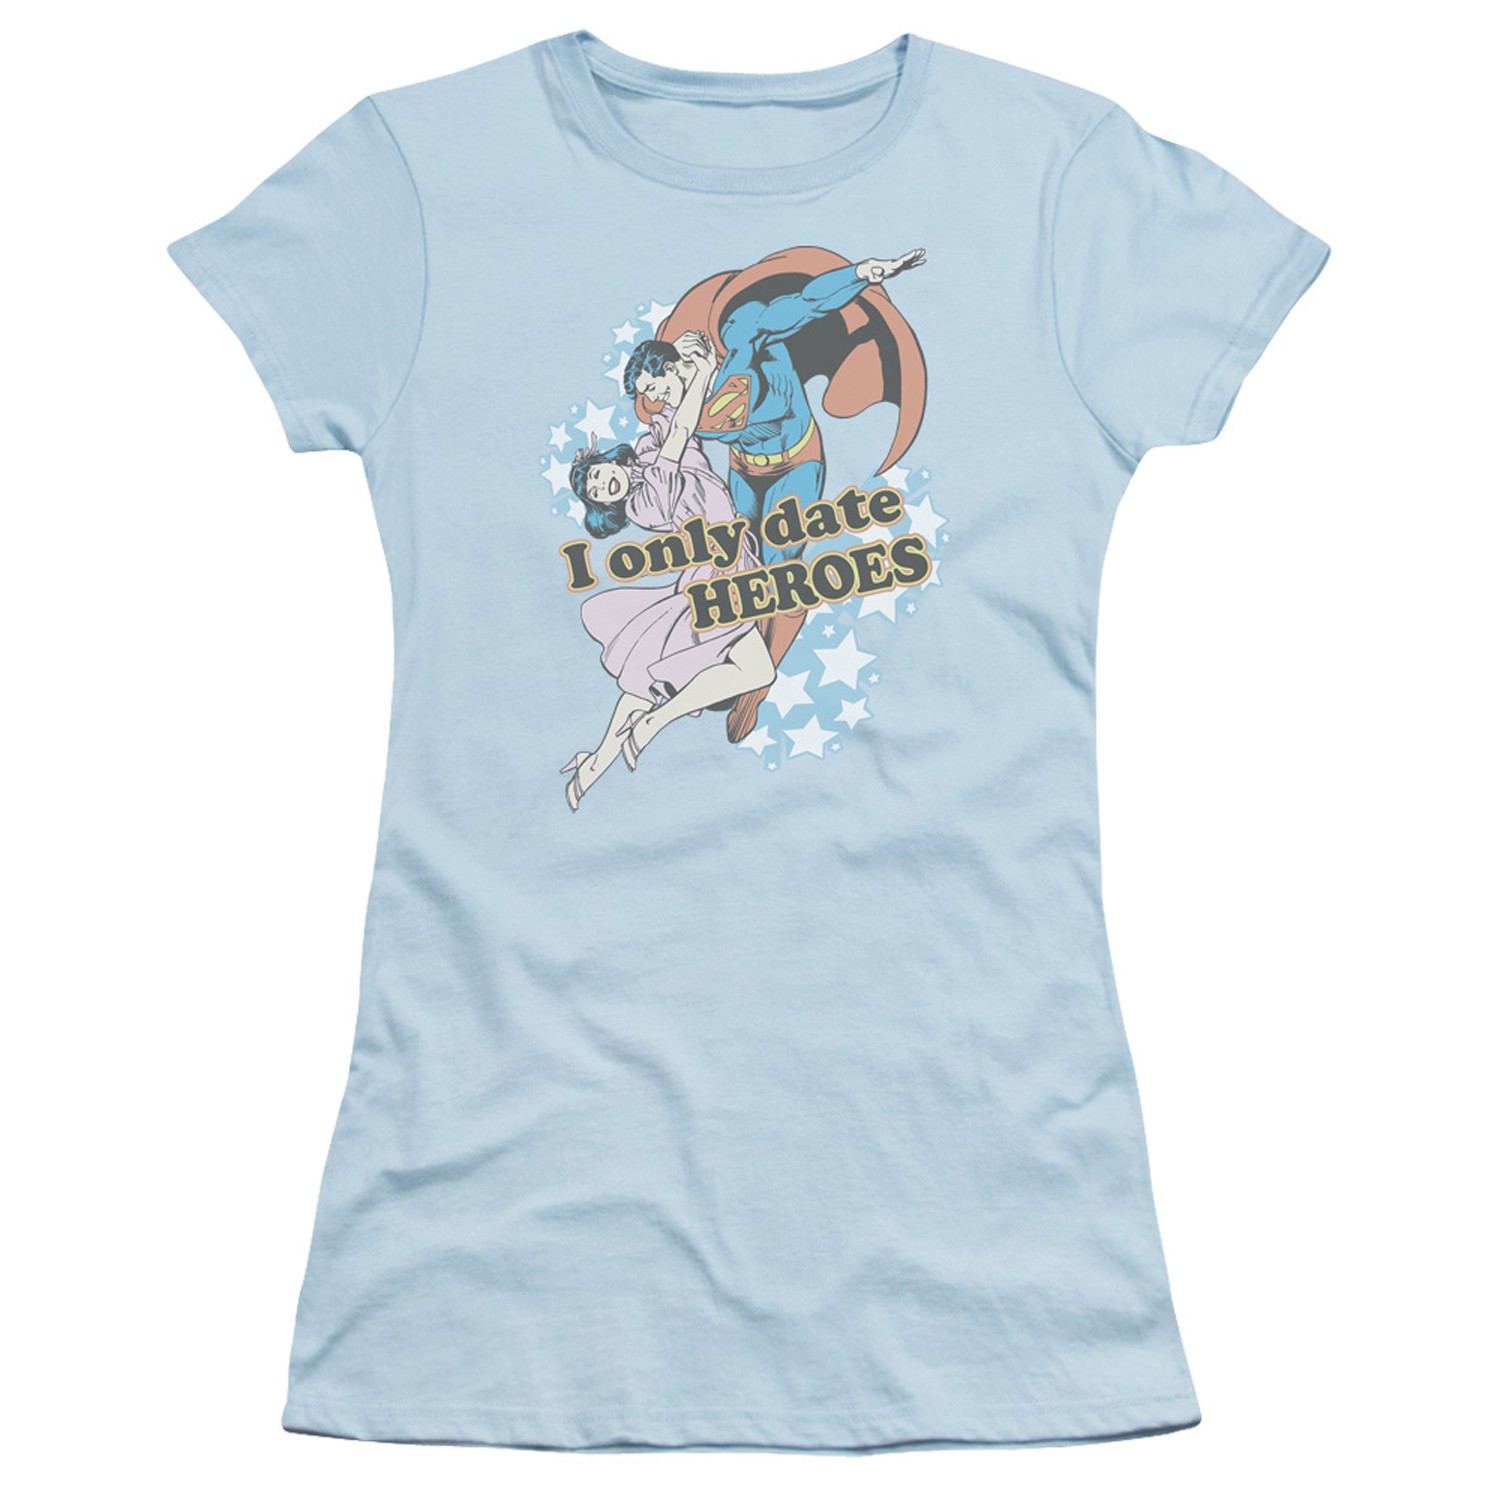 Superman I Only Date Heroes Women's Tshirt